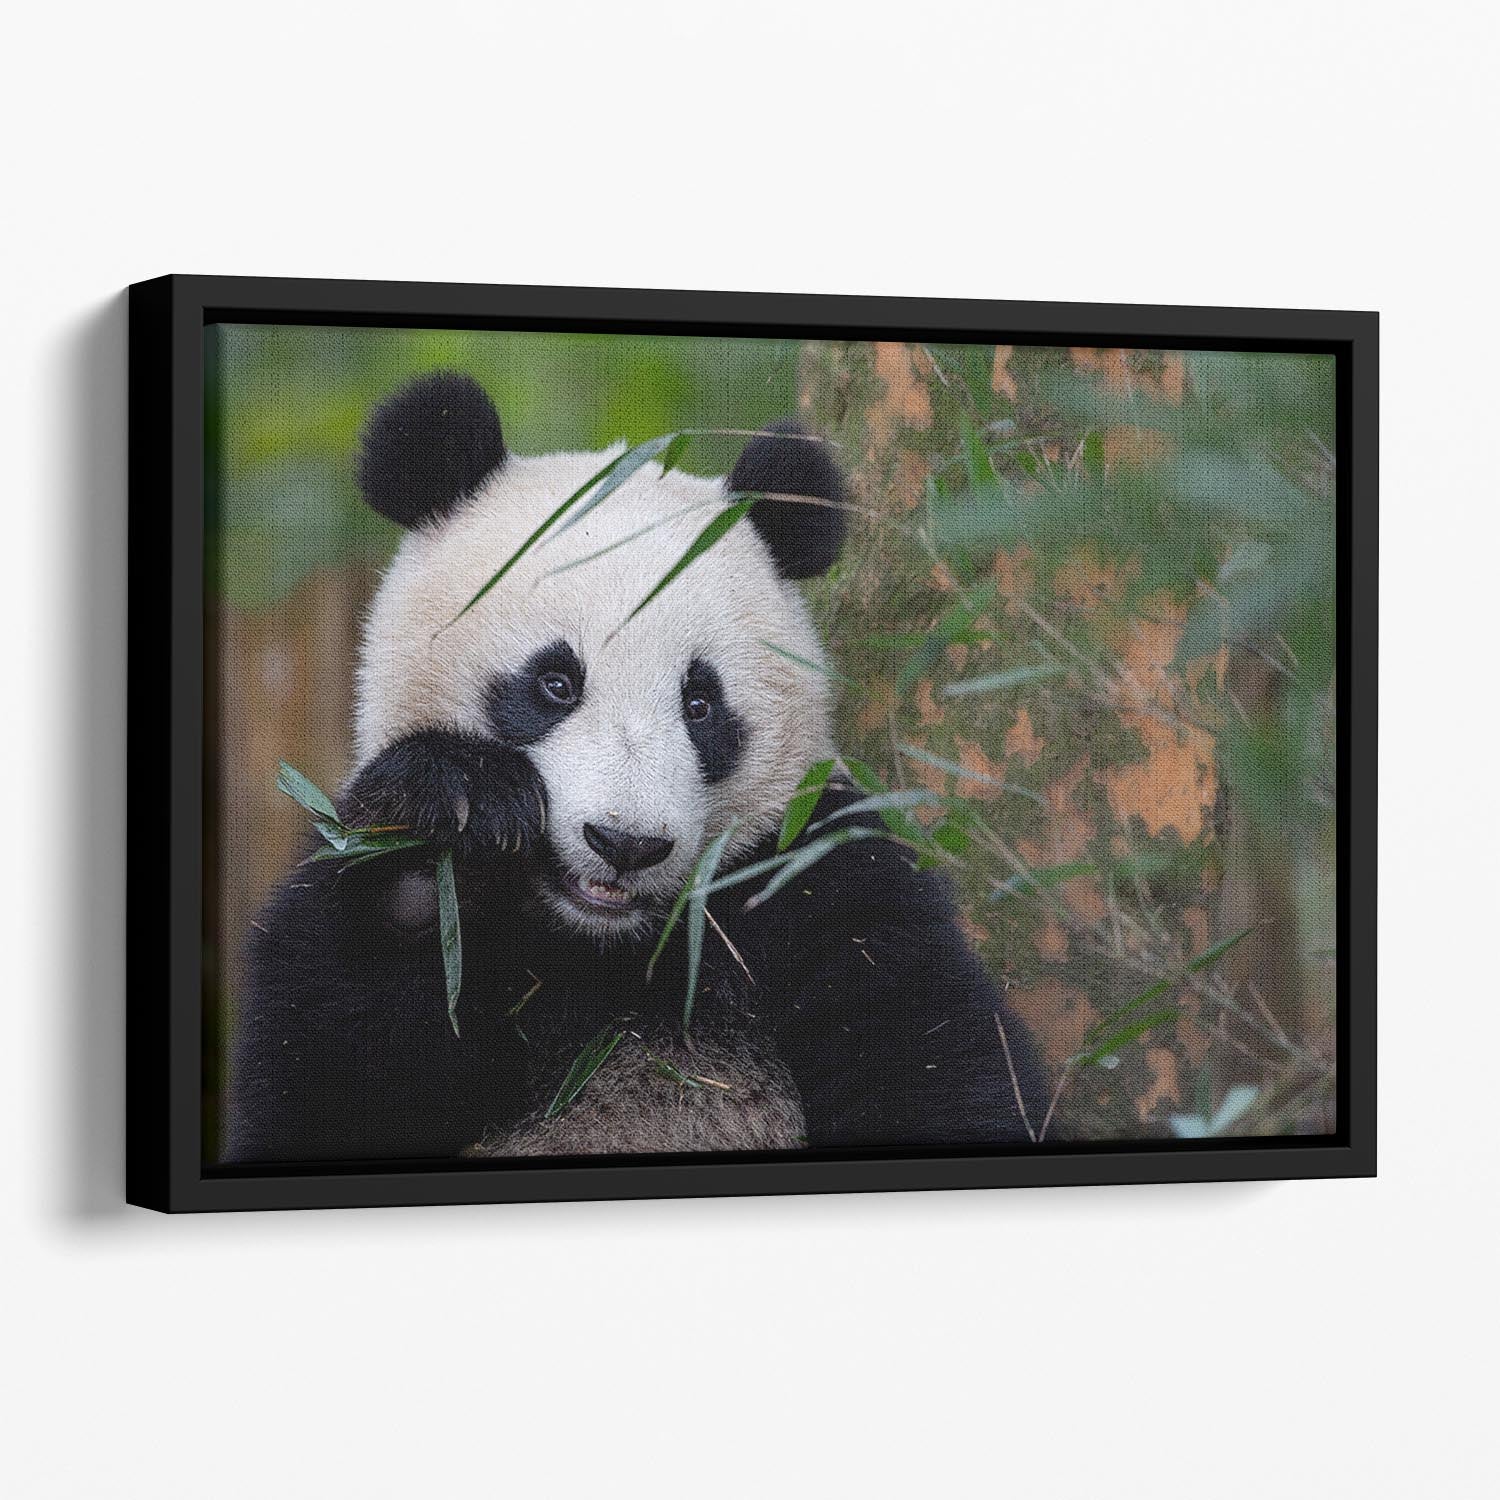 Bamboo Time Floating Framed Canvas - Canvas Art Rocks - 1